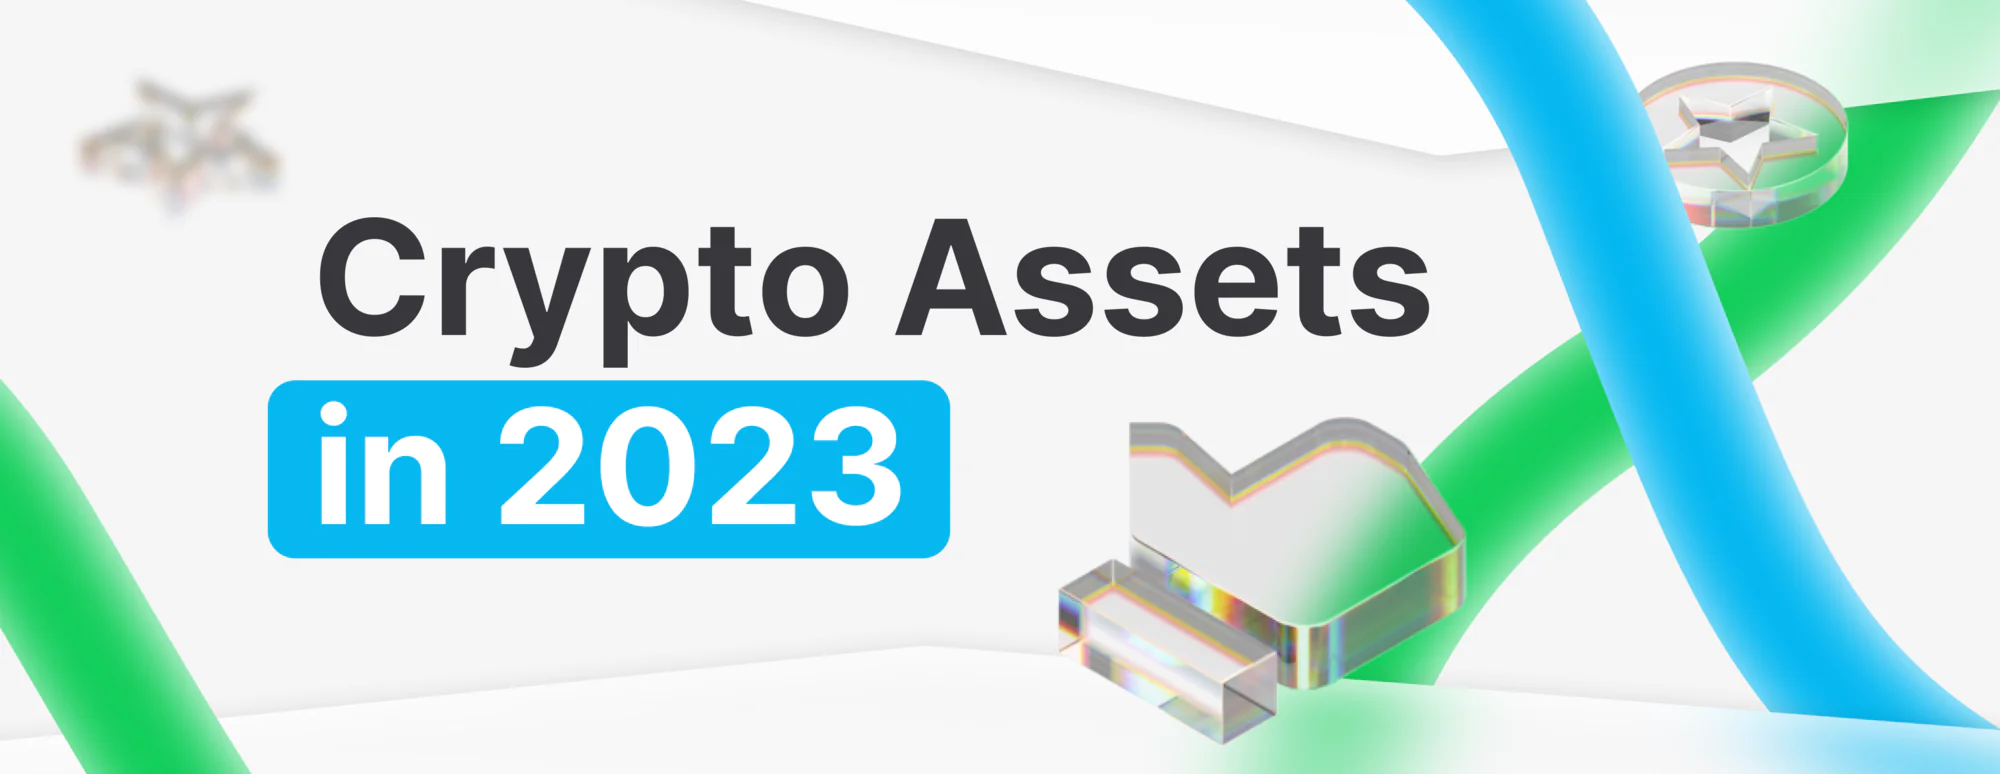 The Most Liquid and Valuable Crypto Assets in 2023|